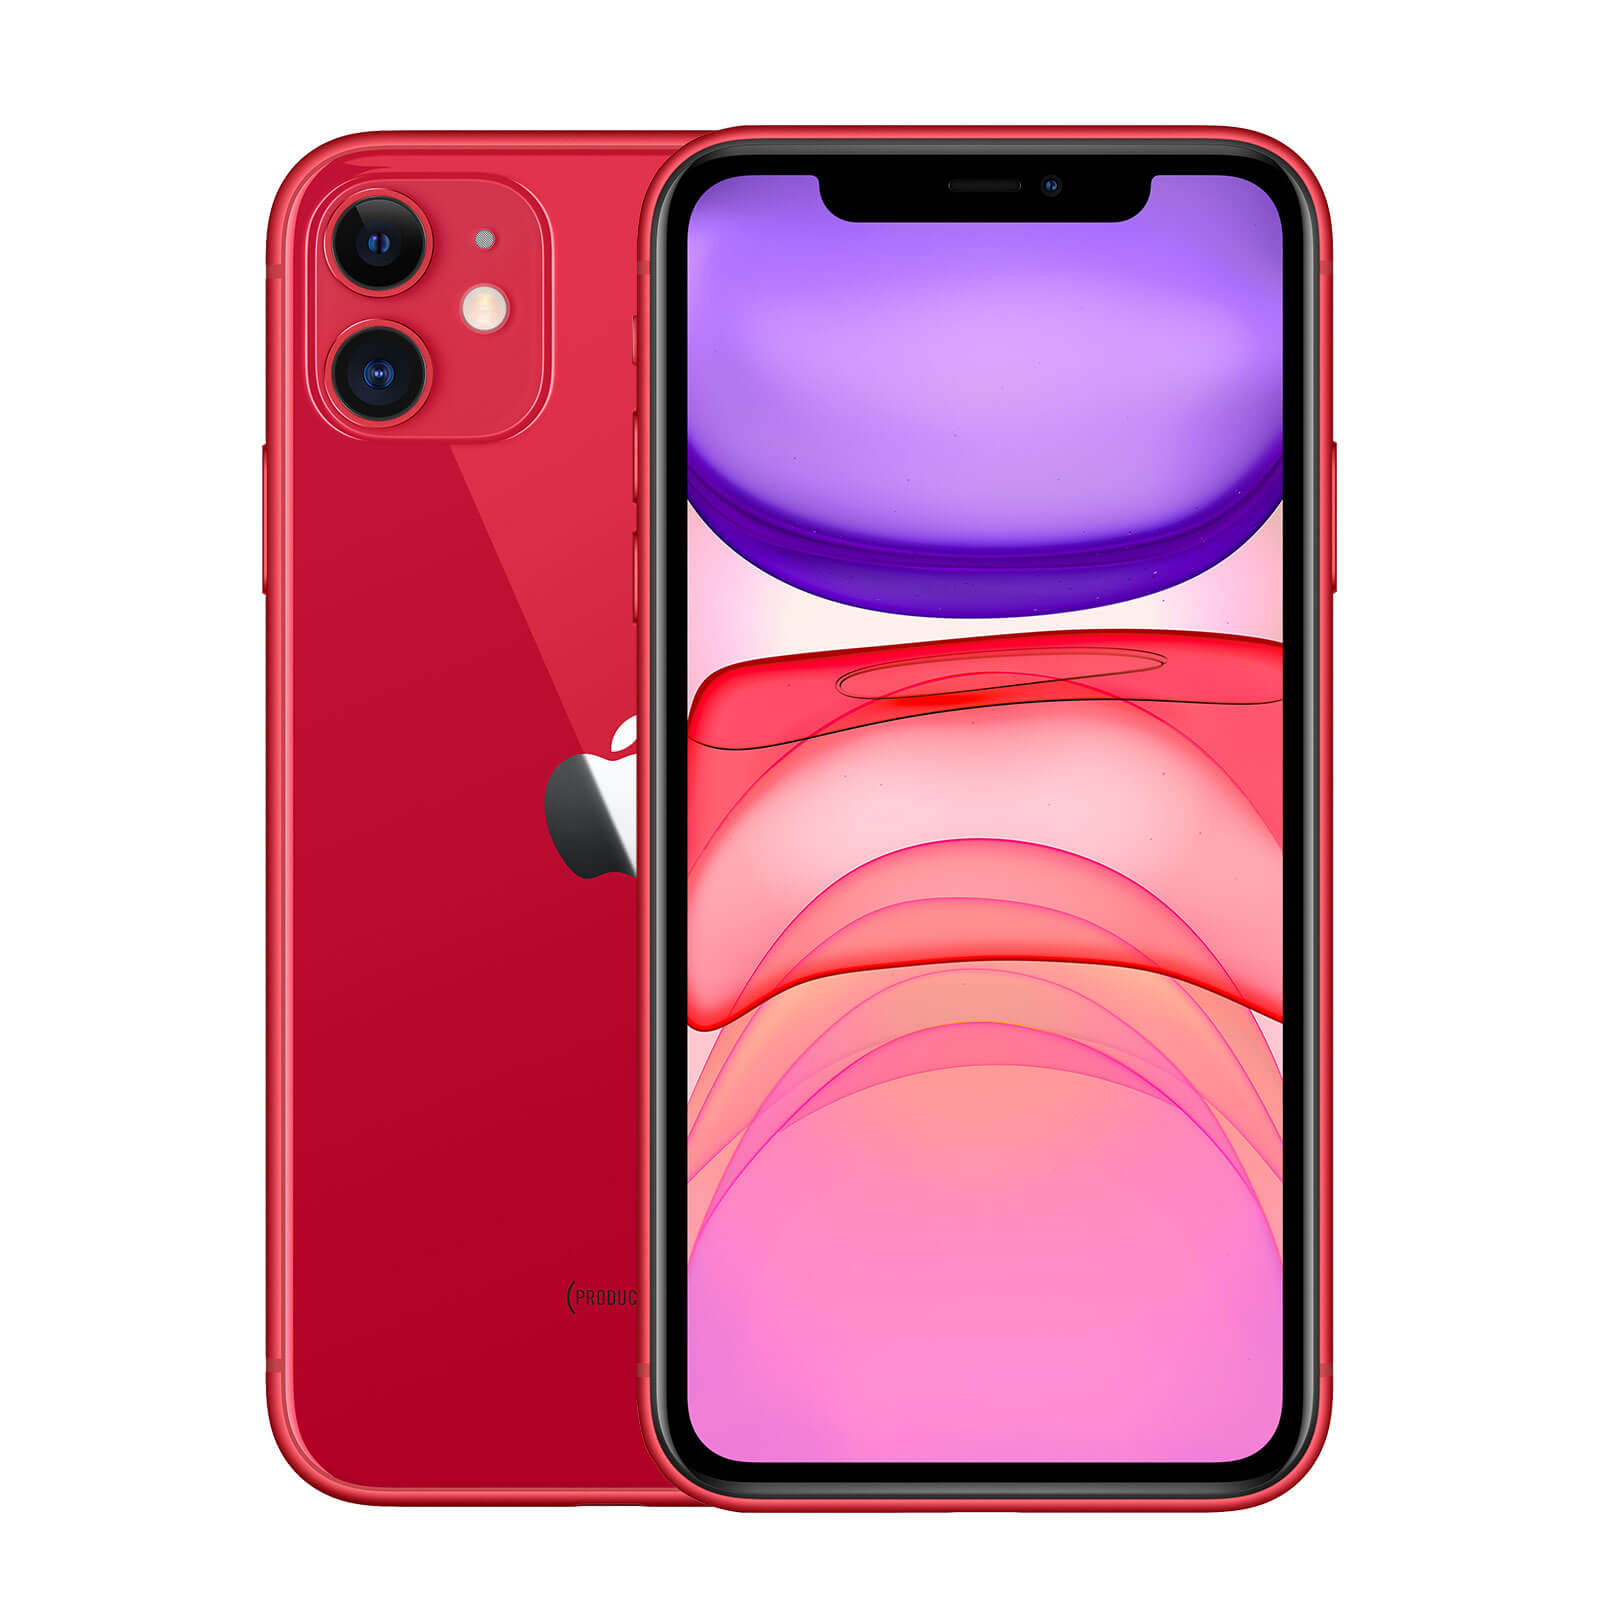 Apple iPhone 11 128GB Product Red Fair - T-Mobile